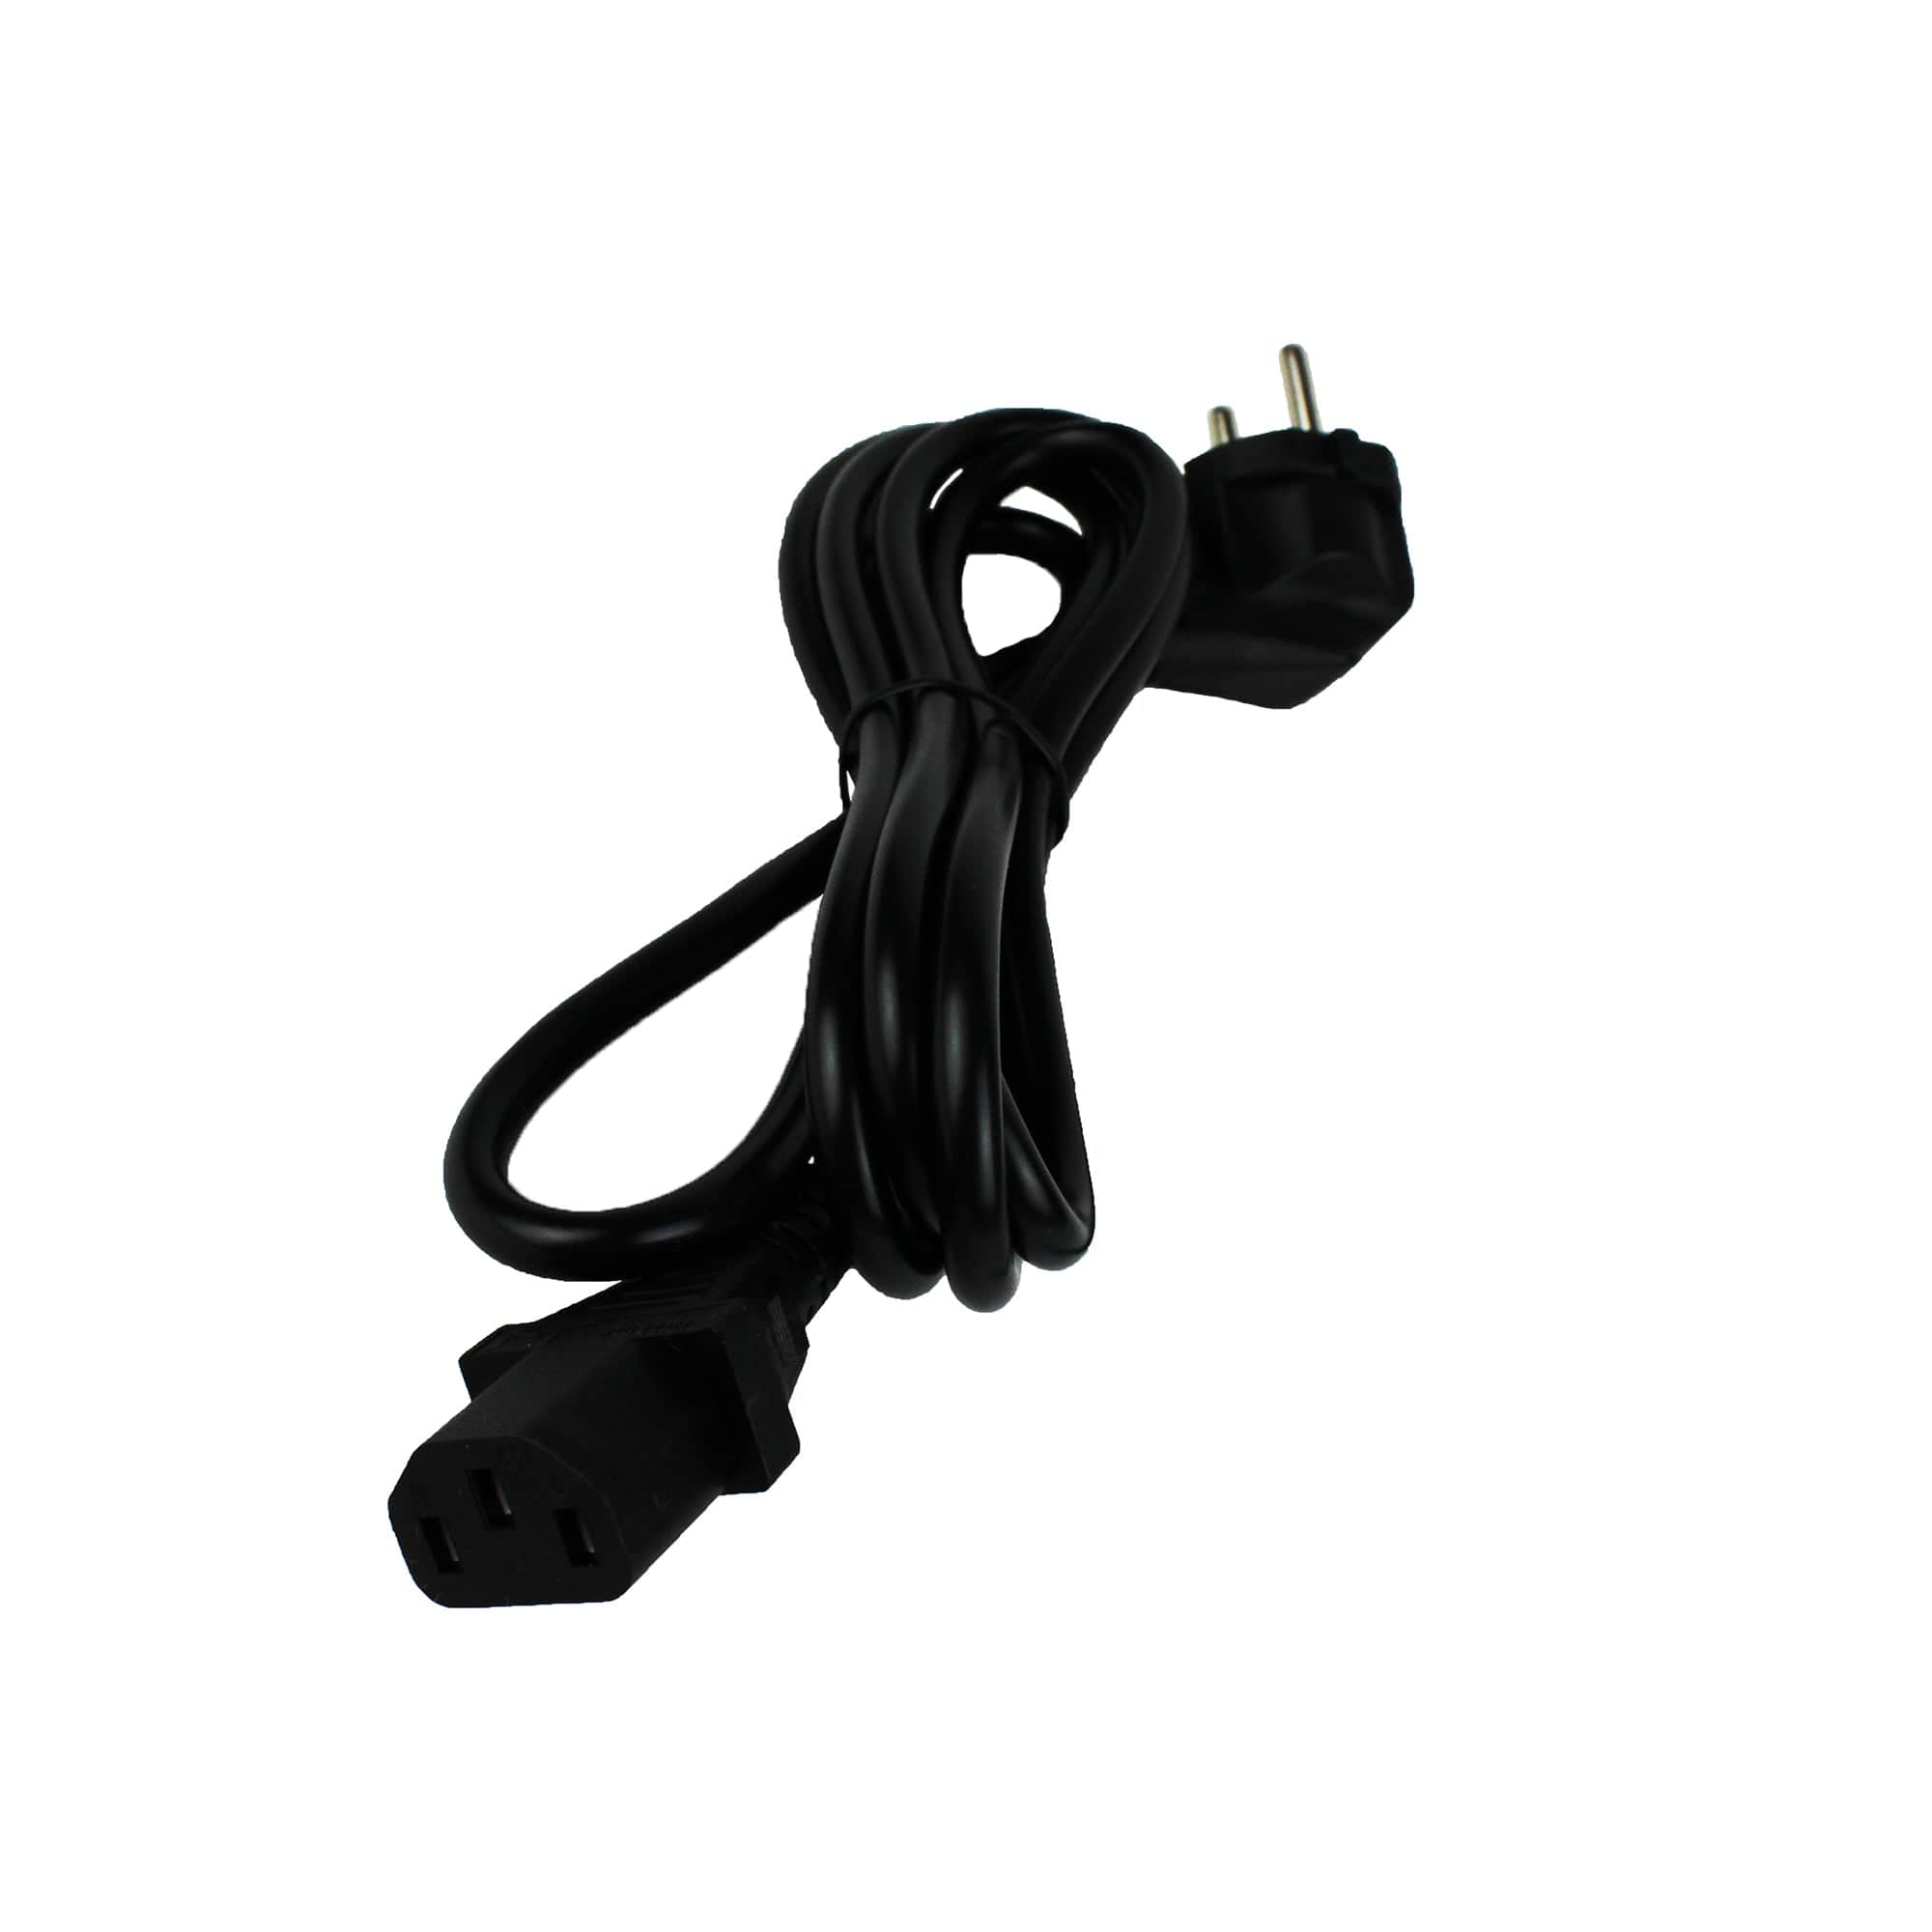  DOMETIC Replacement Cable for thermoelectric Cooler for  Connection to The 12 Volt Socket, (Length 280 cm), Black : Automotive